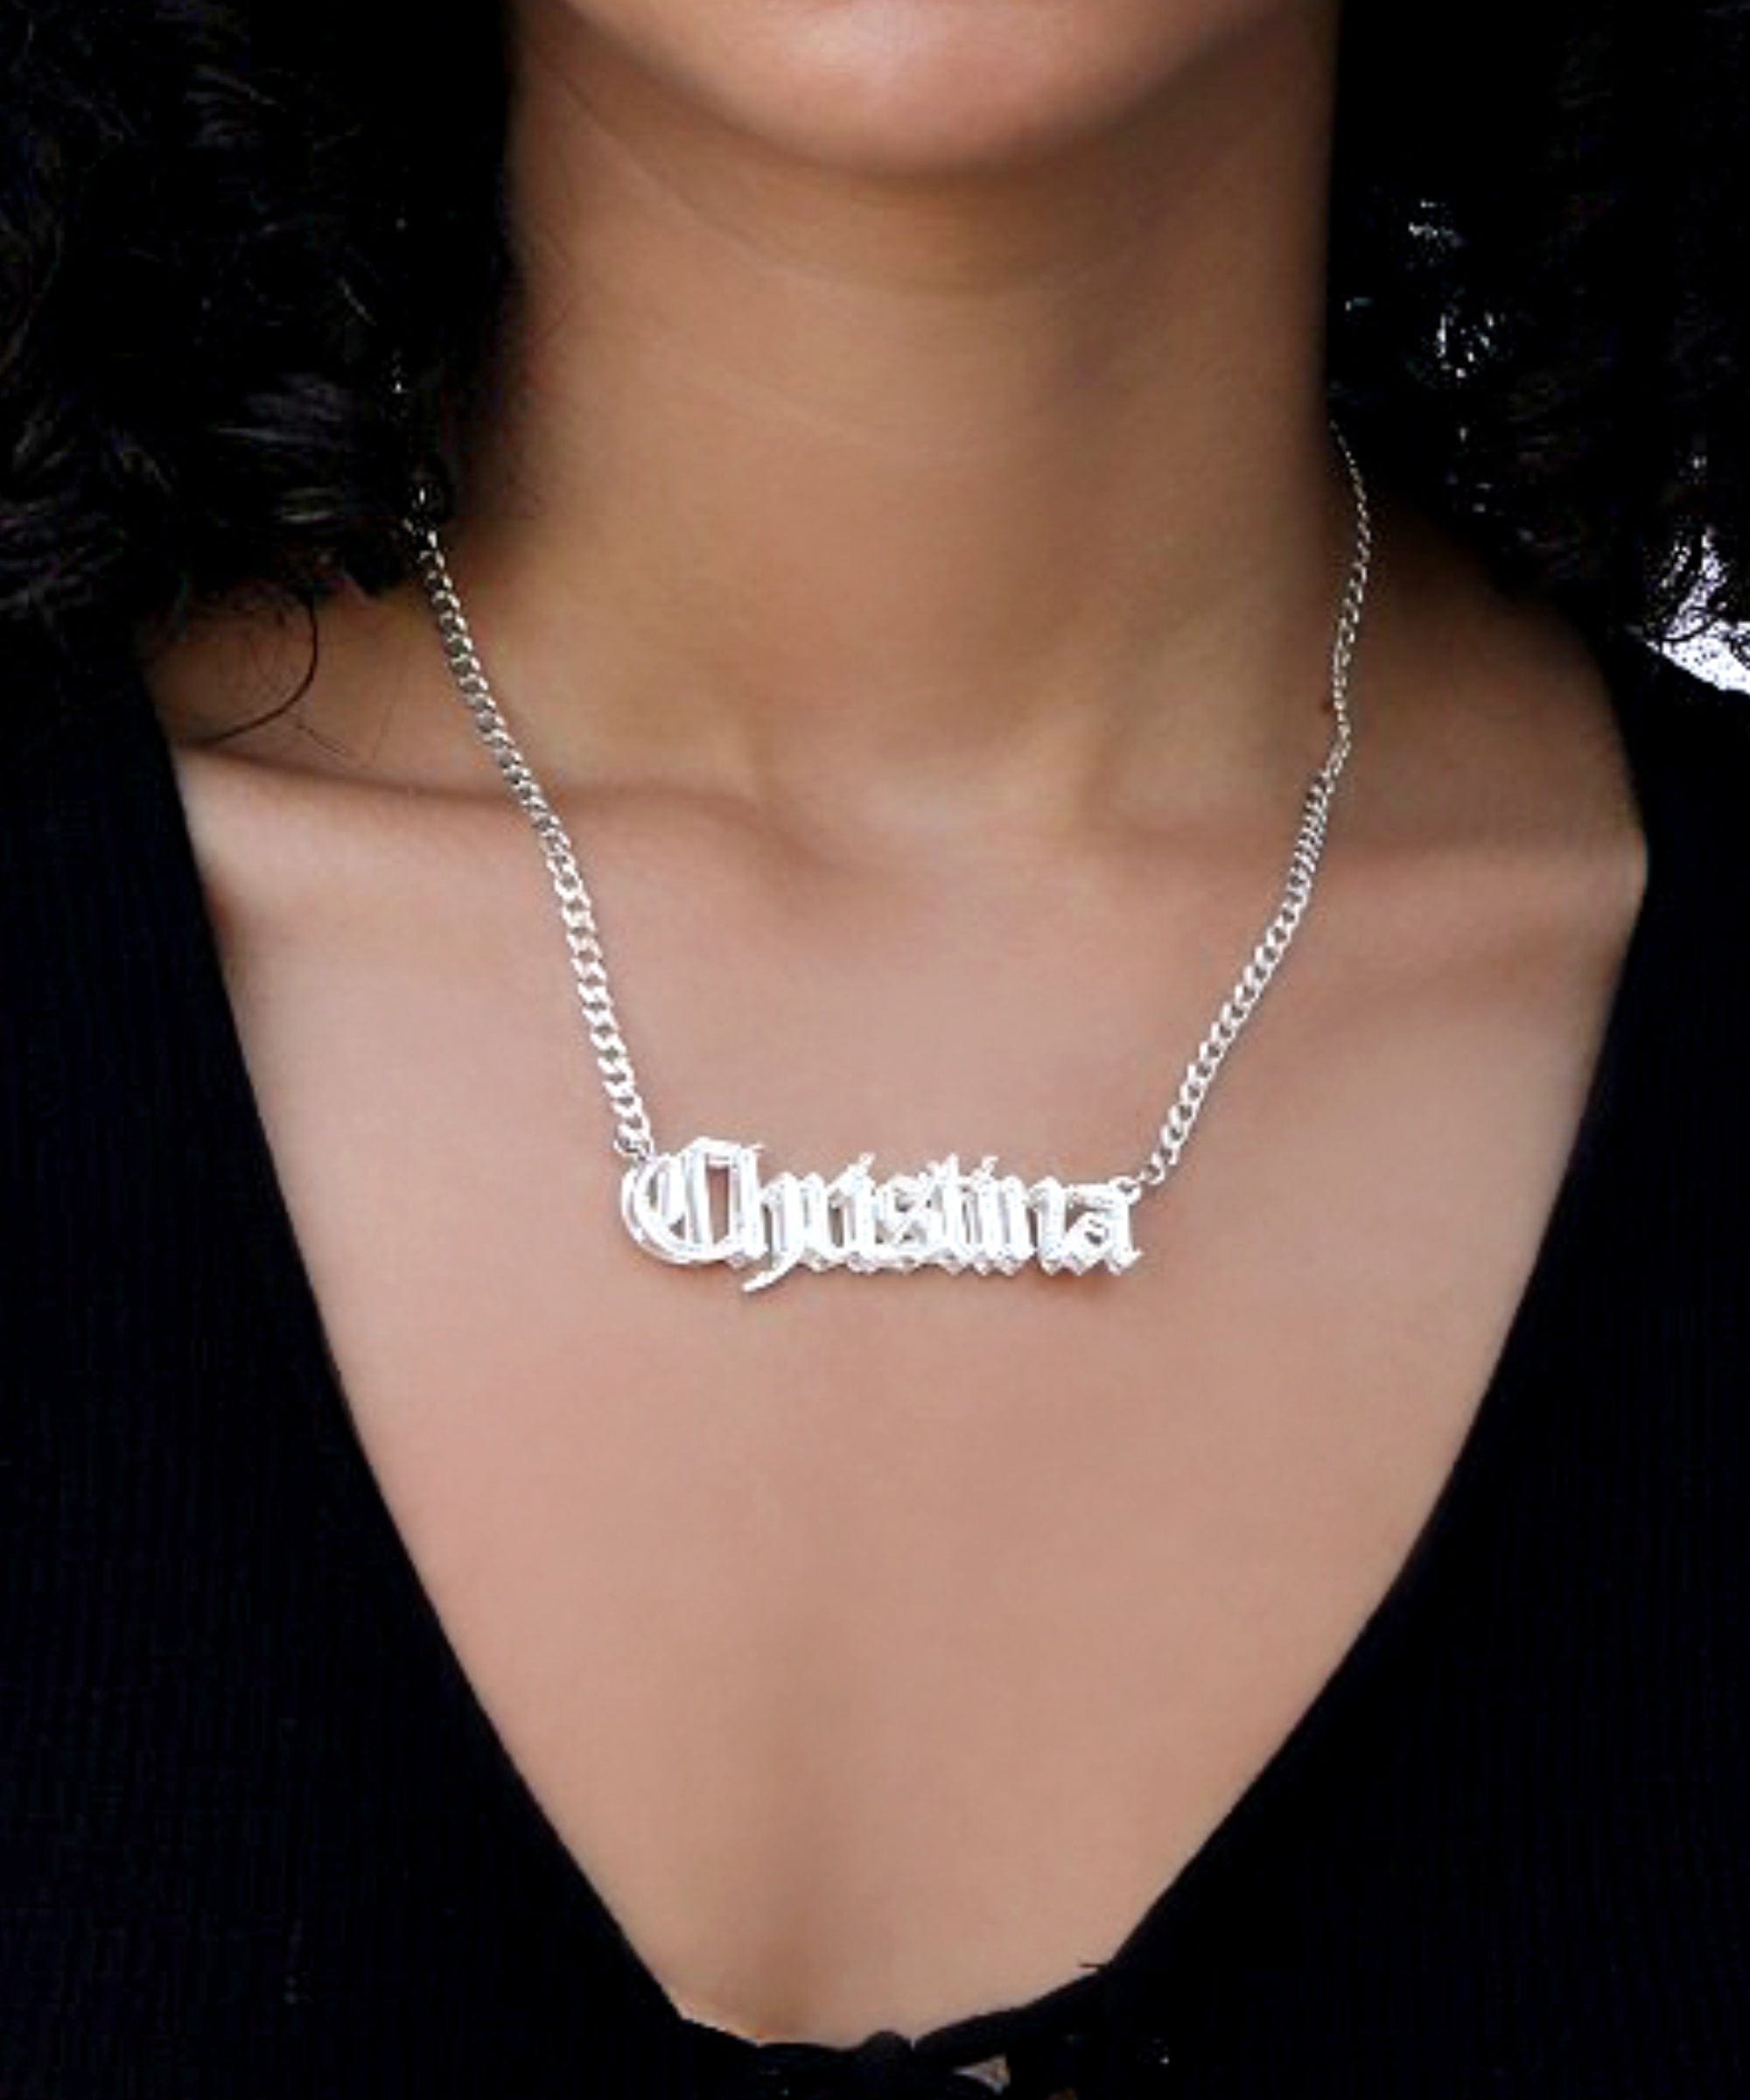 Double Plated Gothic Name Necklace with Cuban Chain